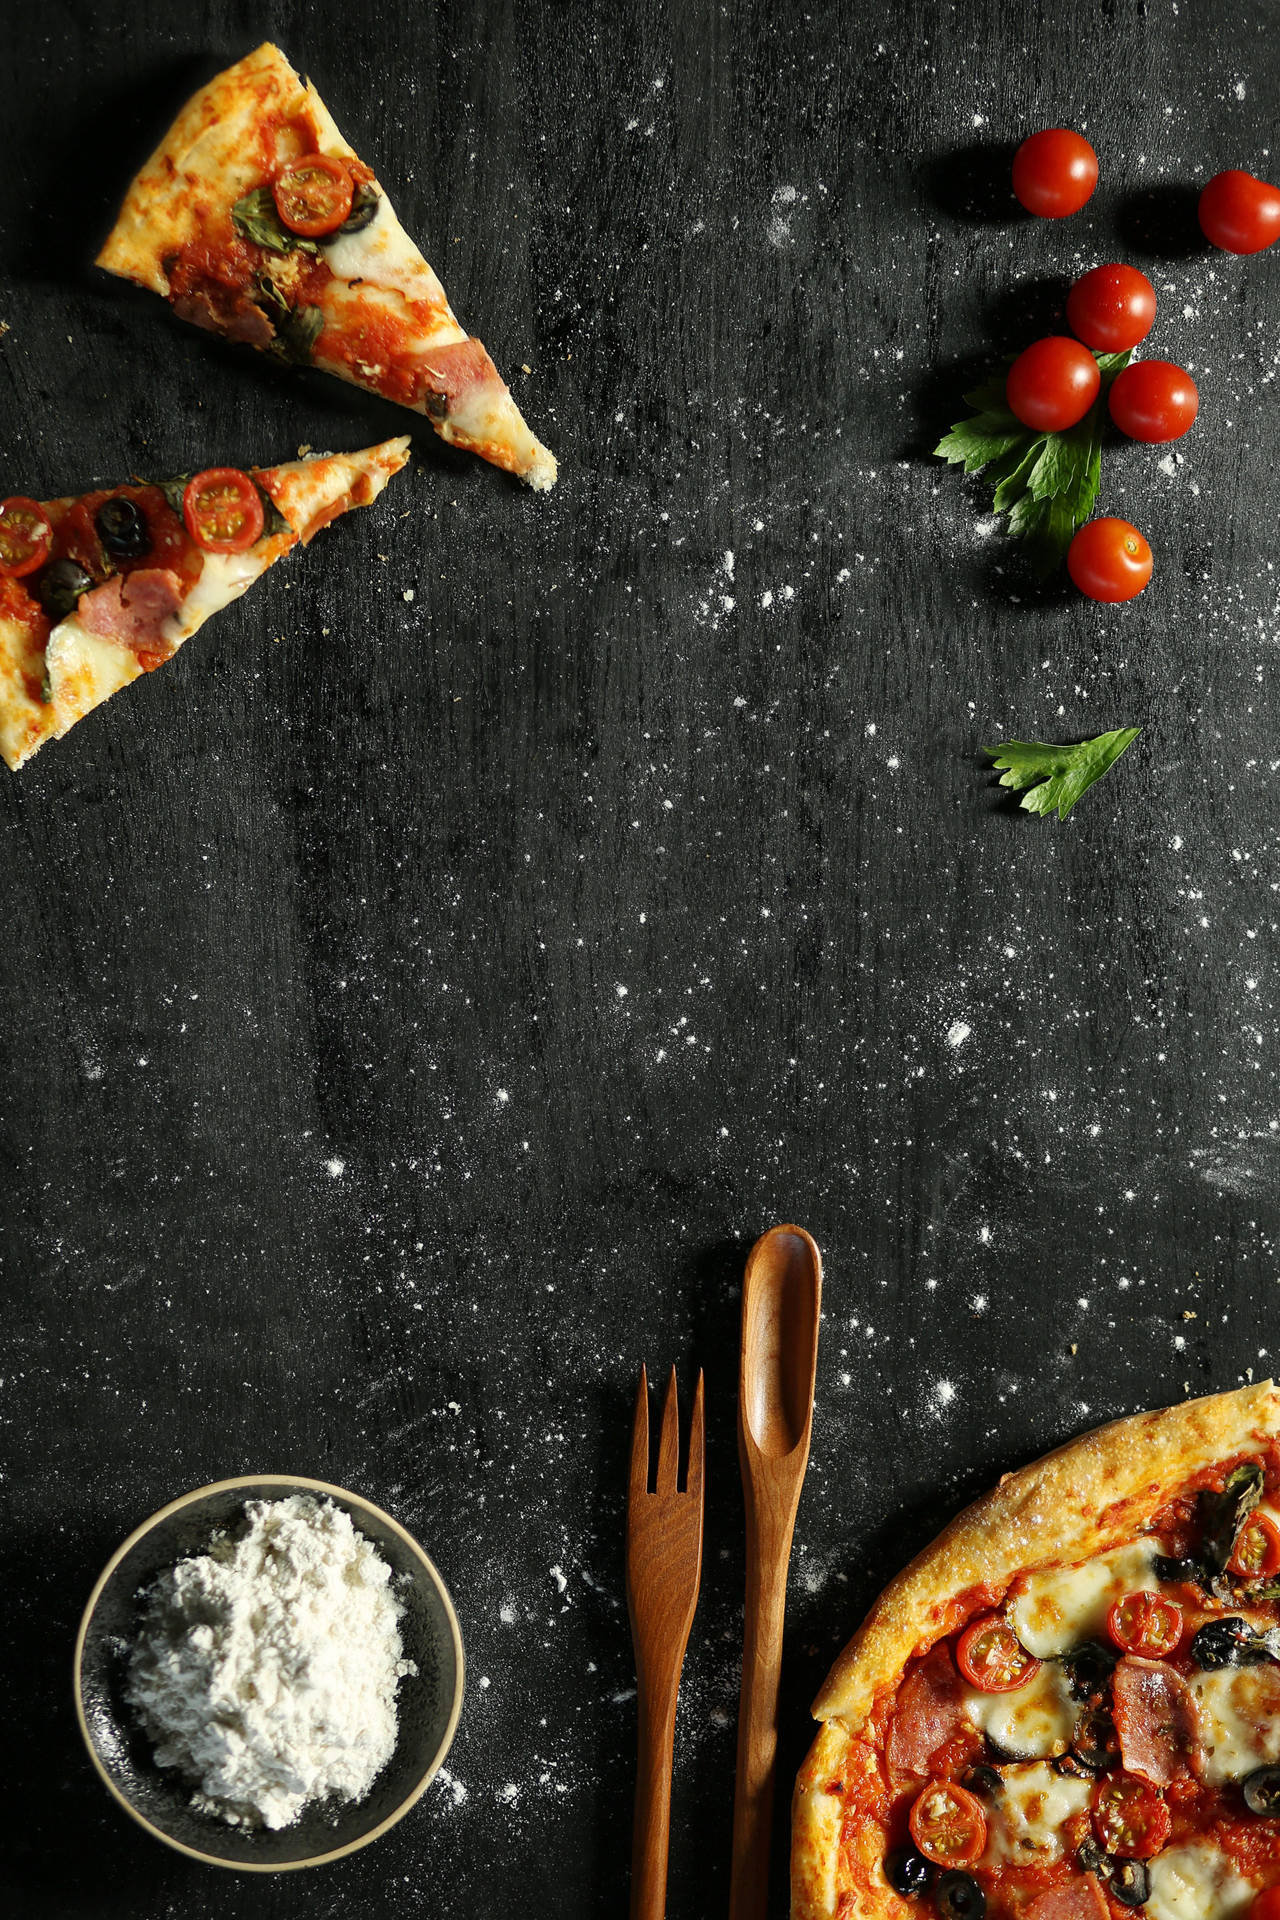 "Sizzling Hot Pizza, Ready to Enjoy!" Wallpaper